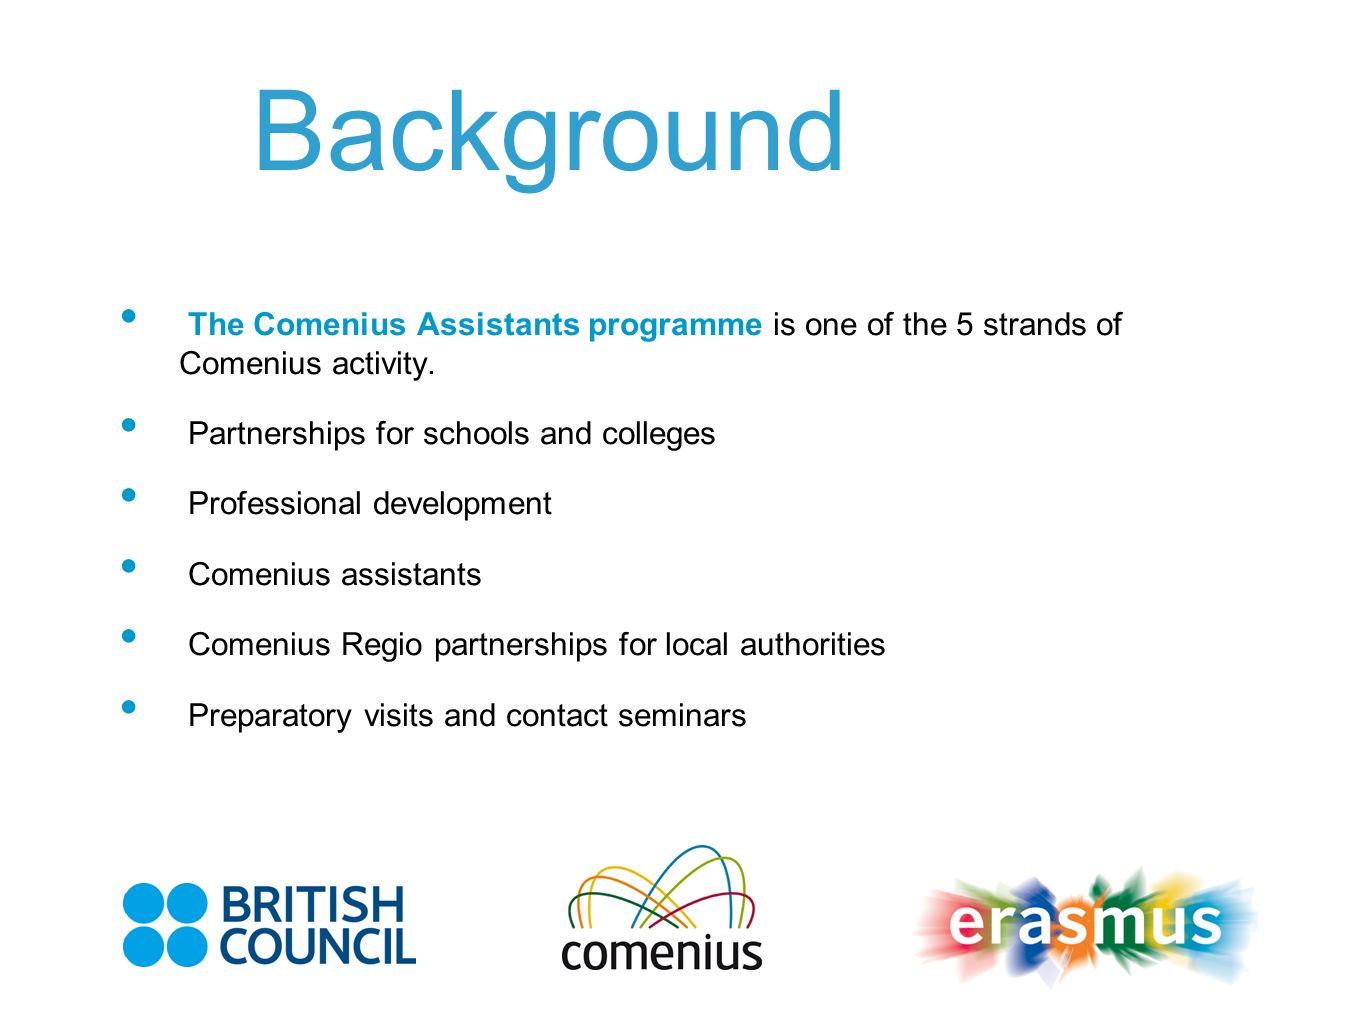 Background The Comenius Assistants programme is one of the 5 strands of Comenius activity.